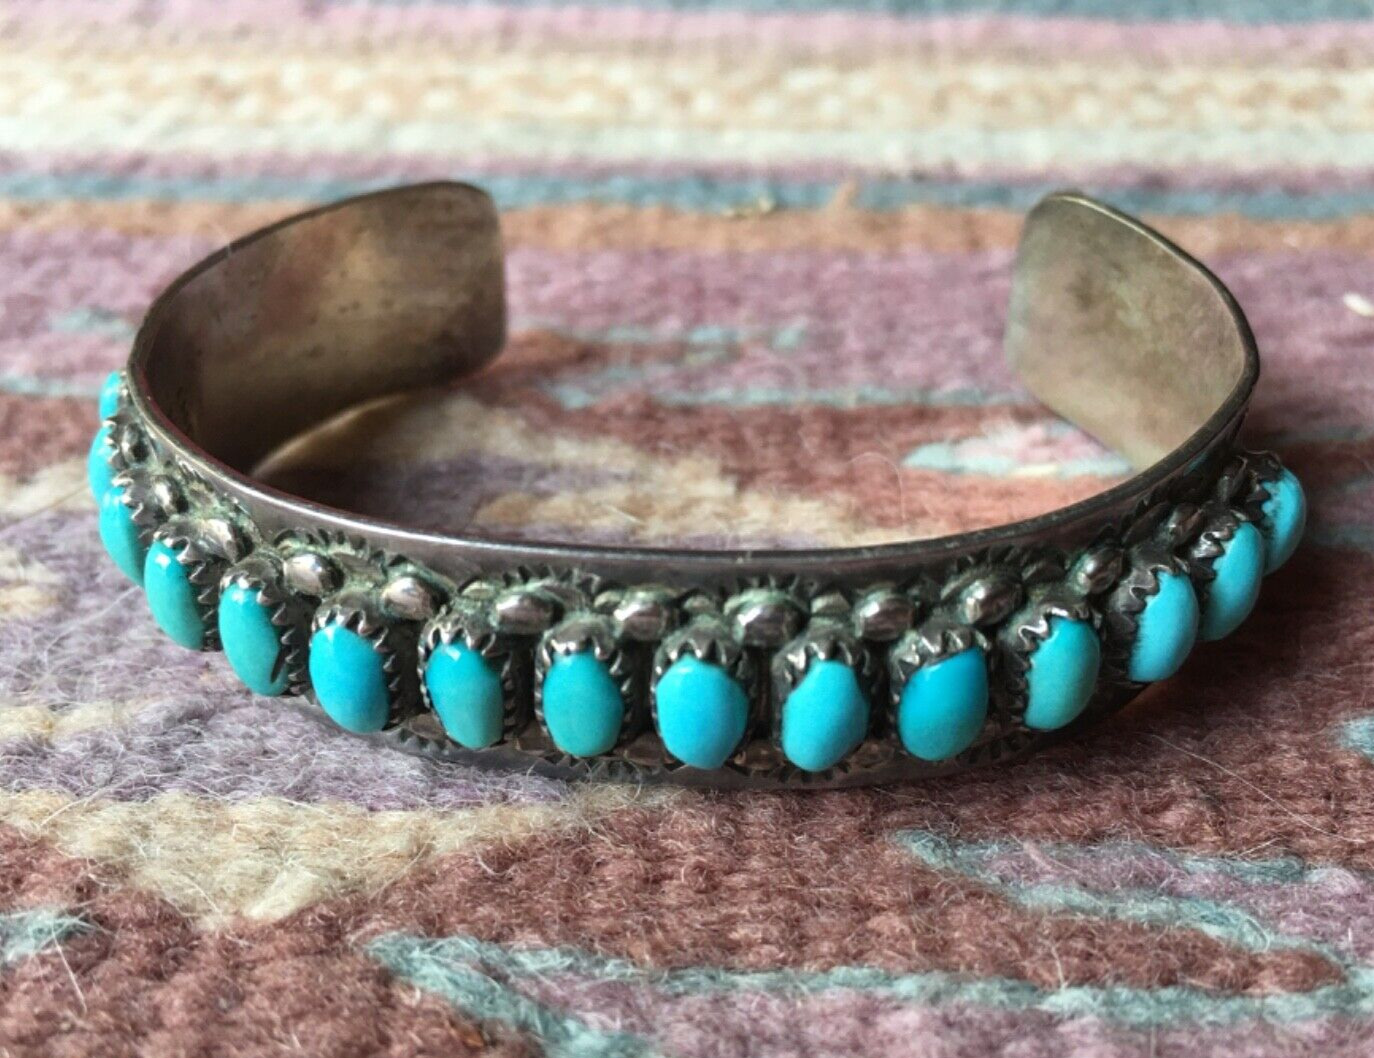 Zuni Sterling Silver Bracelet 15 Oval Turquoise Stones by Fred Weekoty-FW- 1960s